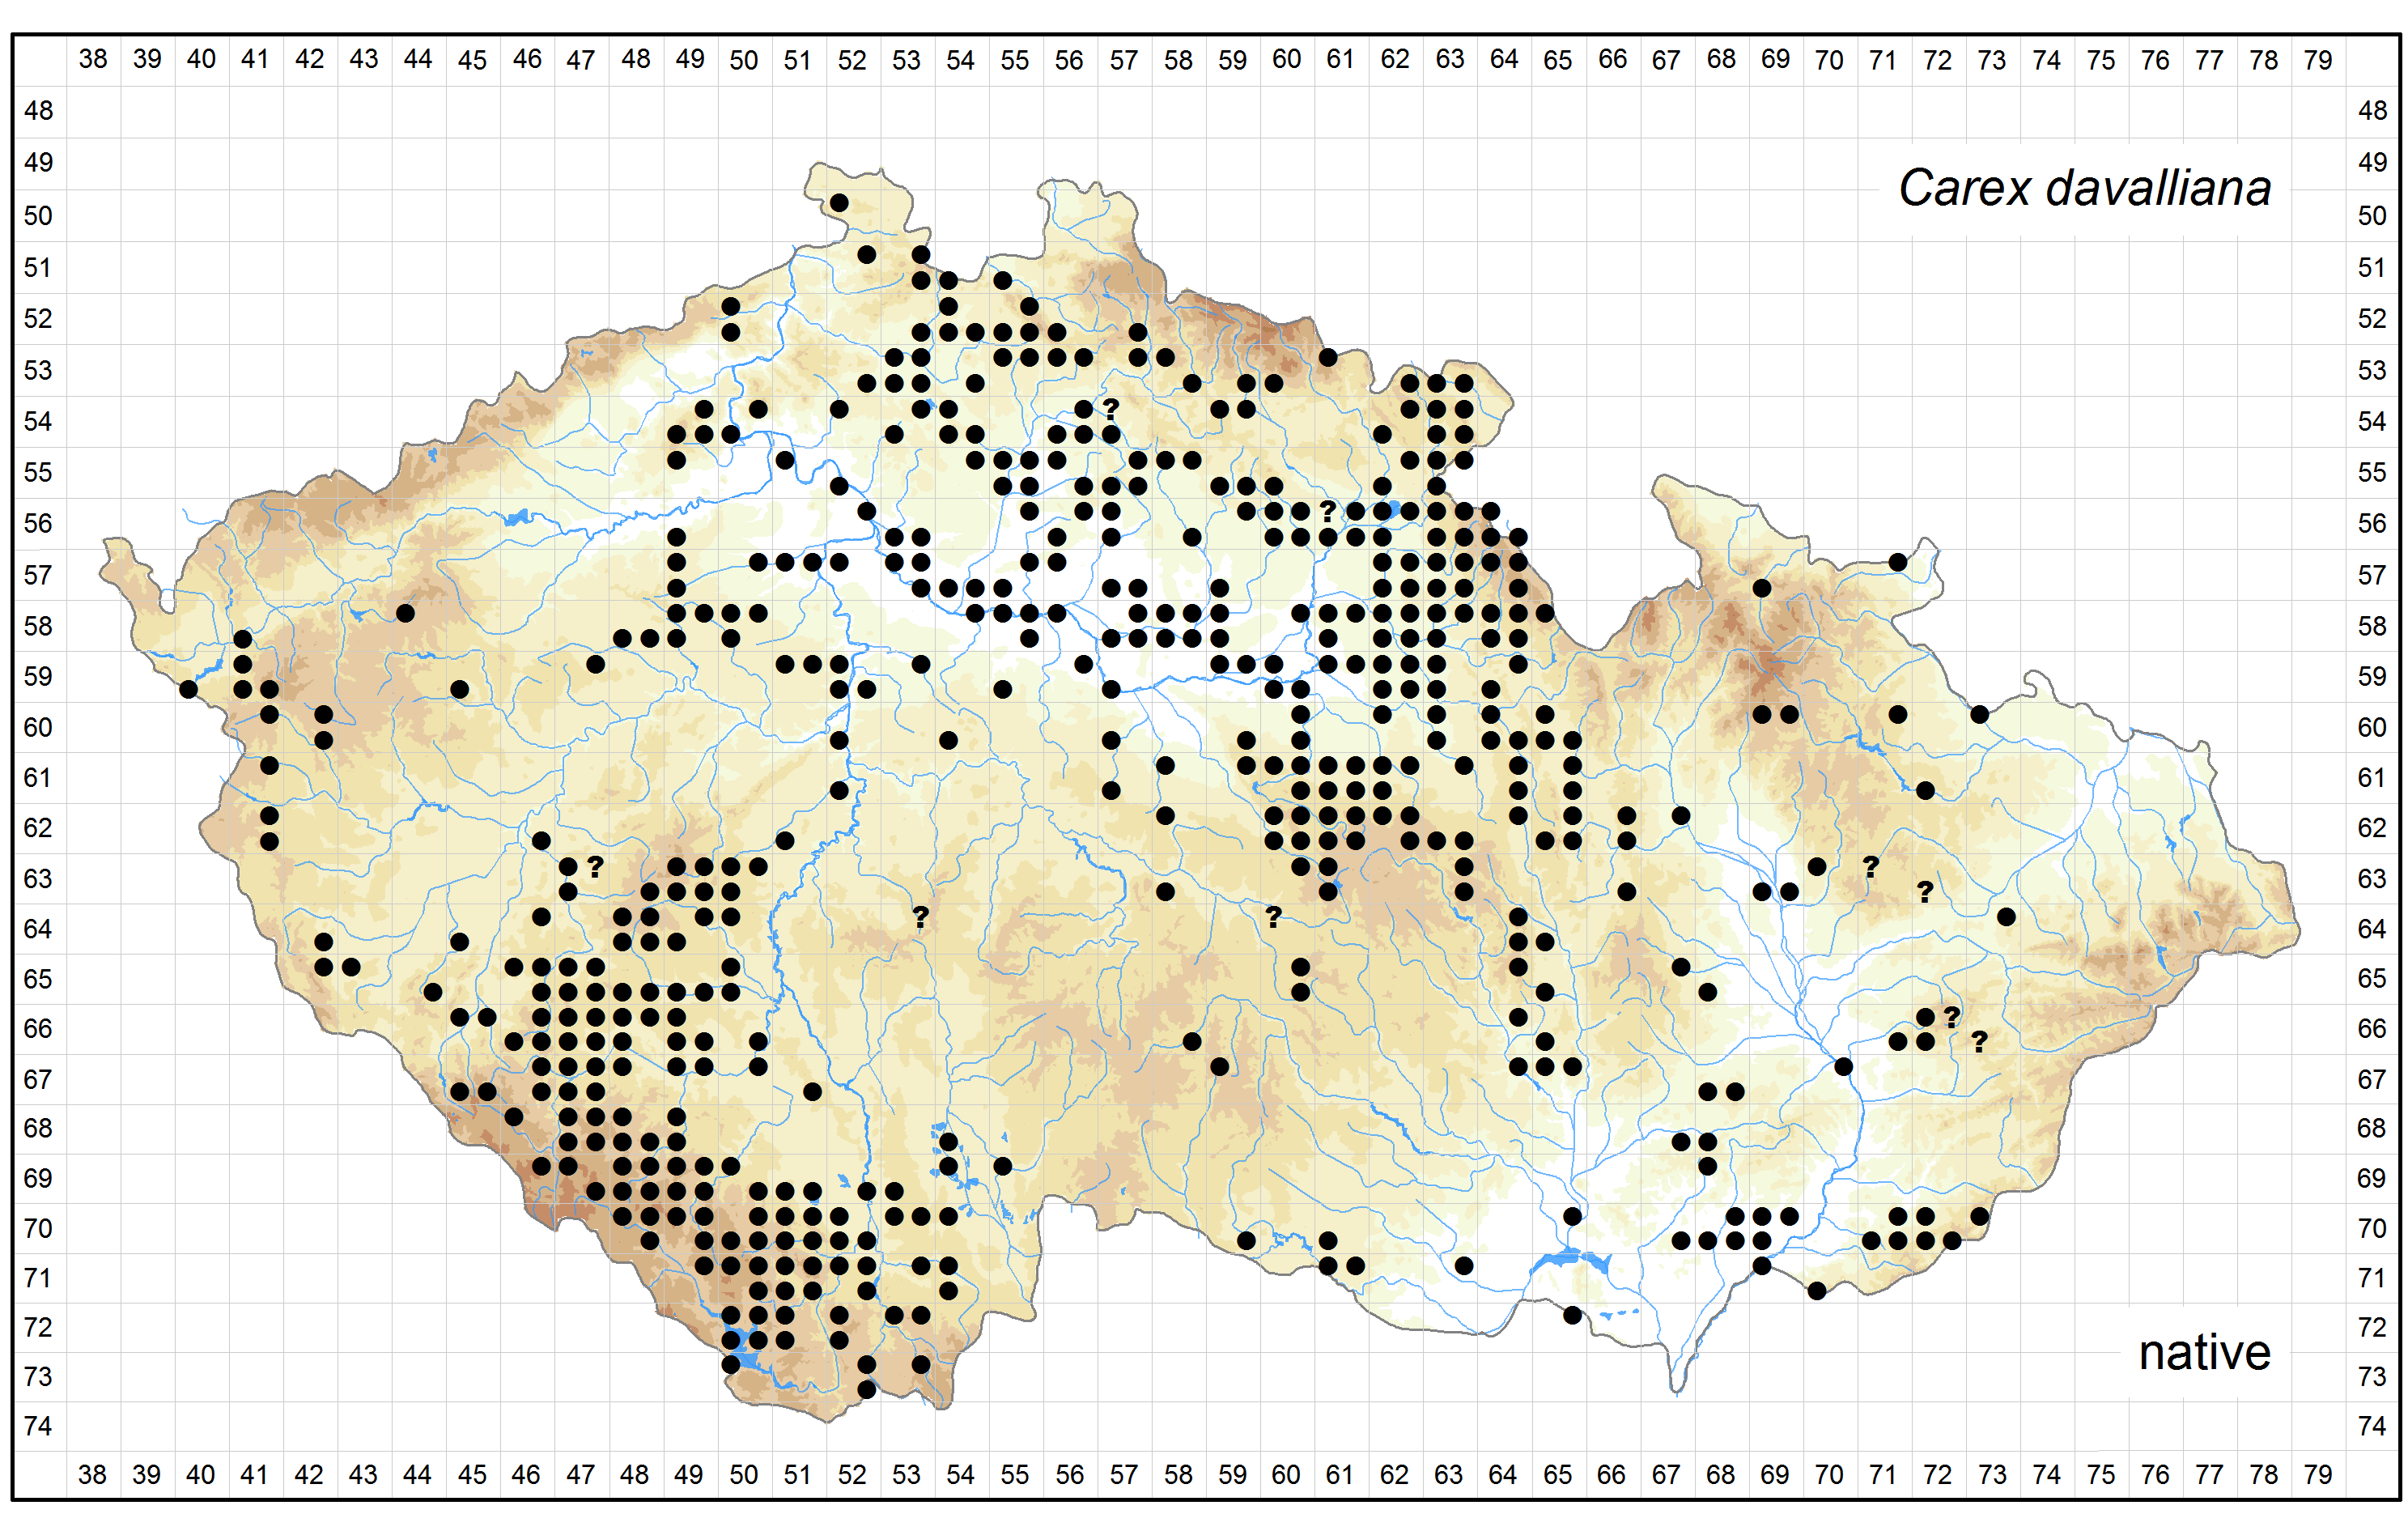 Distribution of Carex davalliana in the Czech Republic Author of the map: Vít Grulich, Radomír Řepka Map produced on: 18-11-2015 Database records used for producing the distribution map of Carex